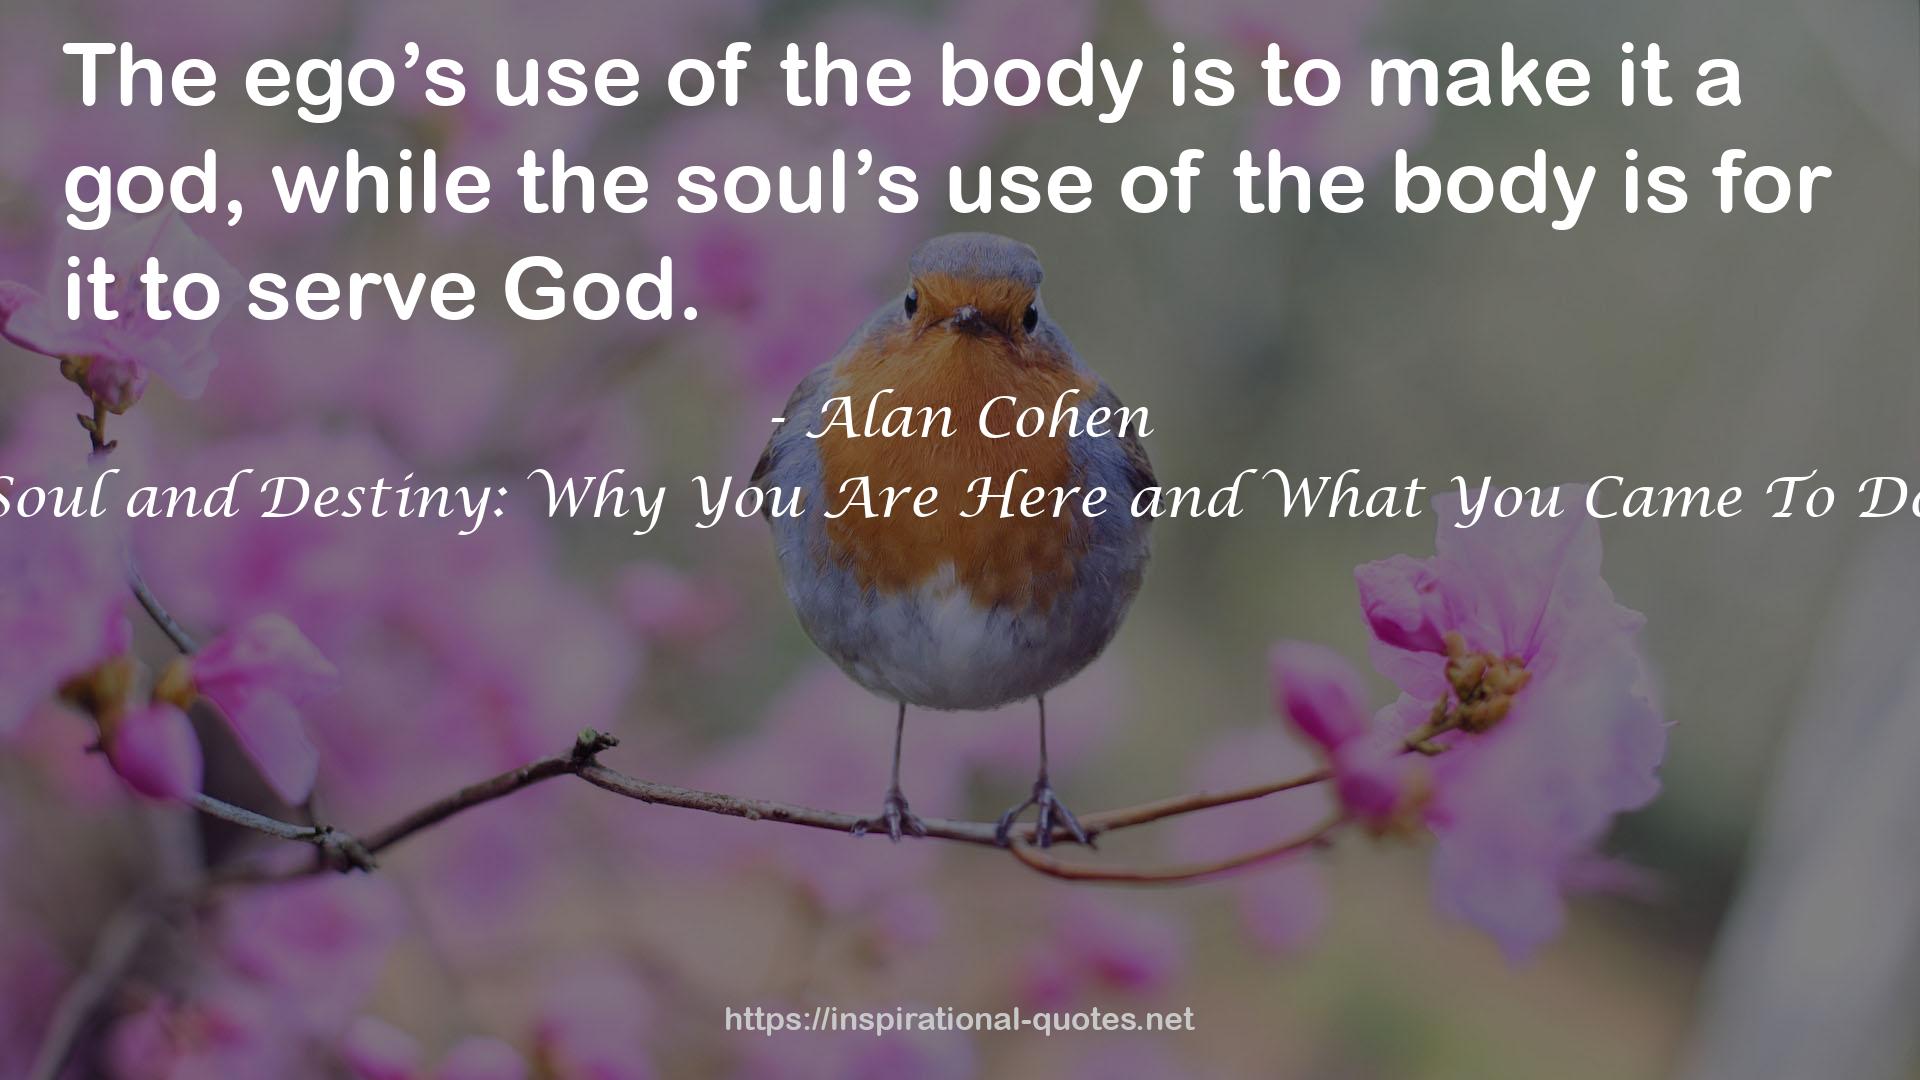 Soul and Destiny: Why You Are Here and What You Came To Do QUOTES